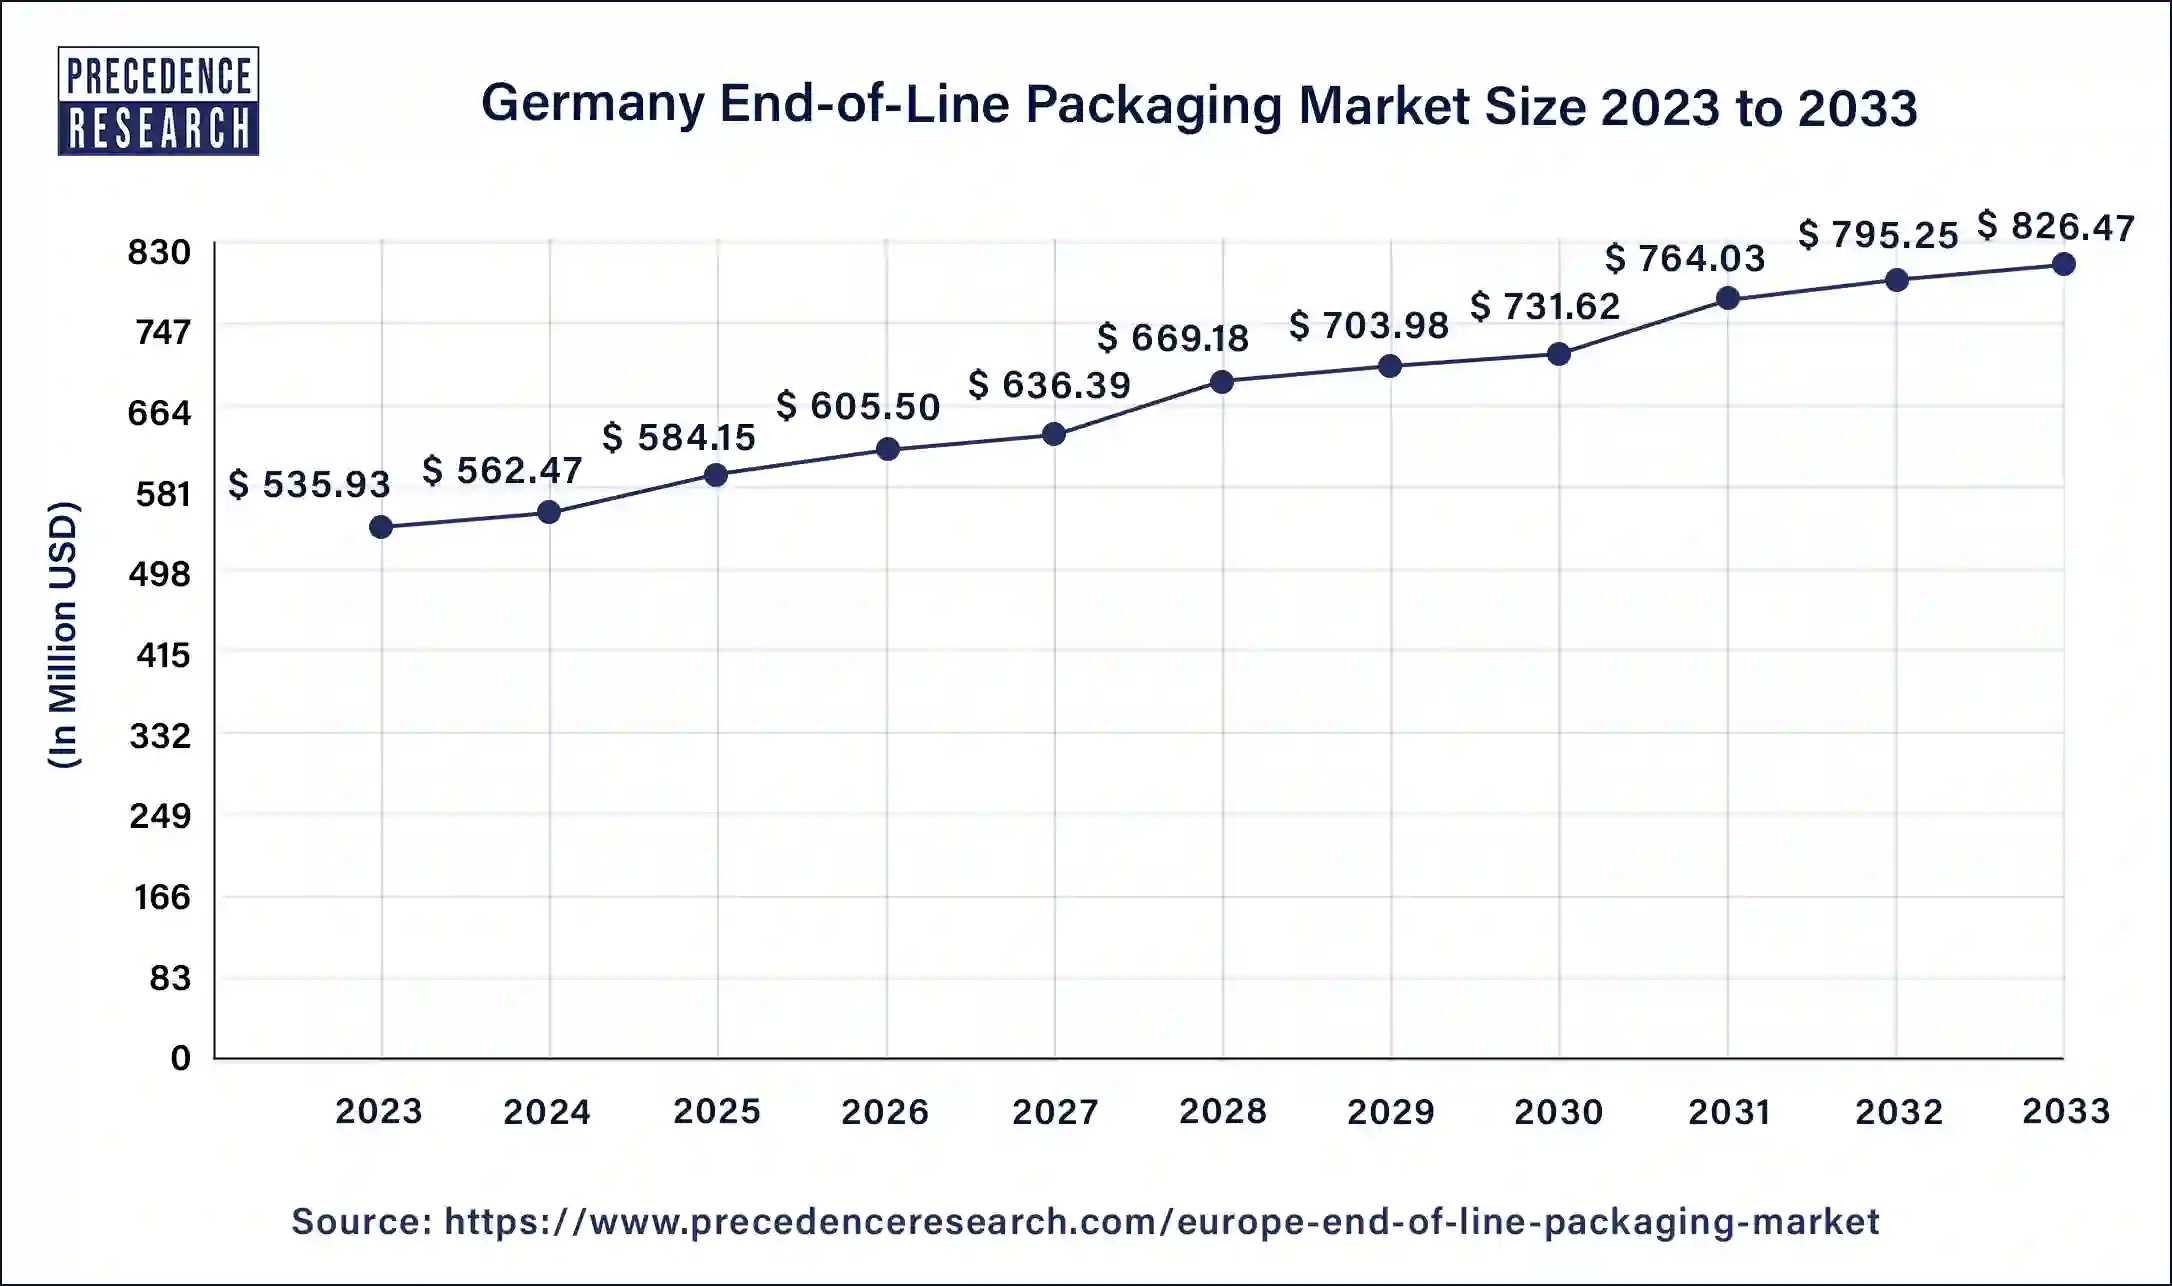 Germany End-of-Line Packaging Market Size 2024 to 2033